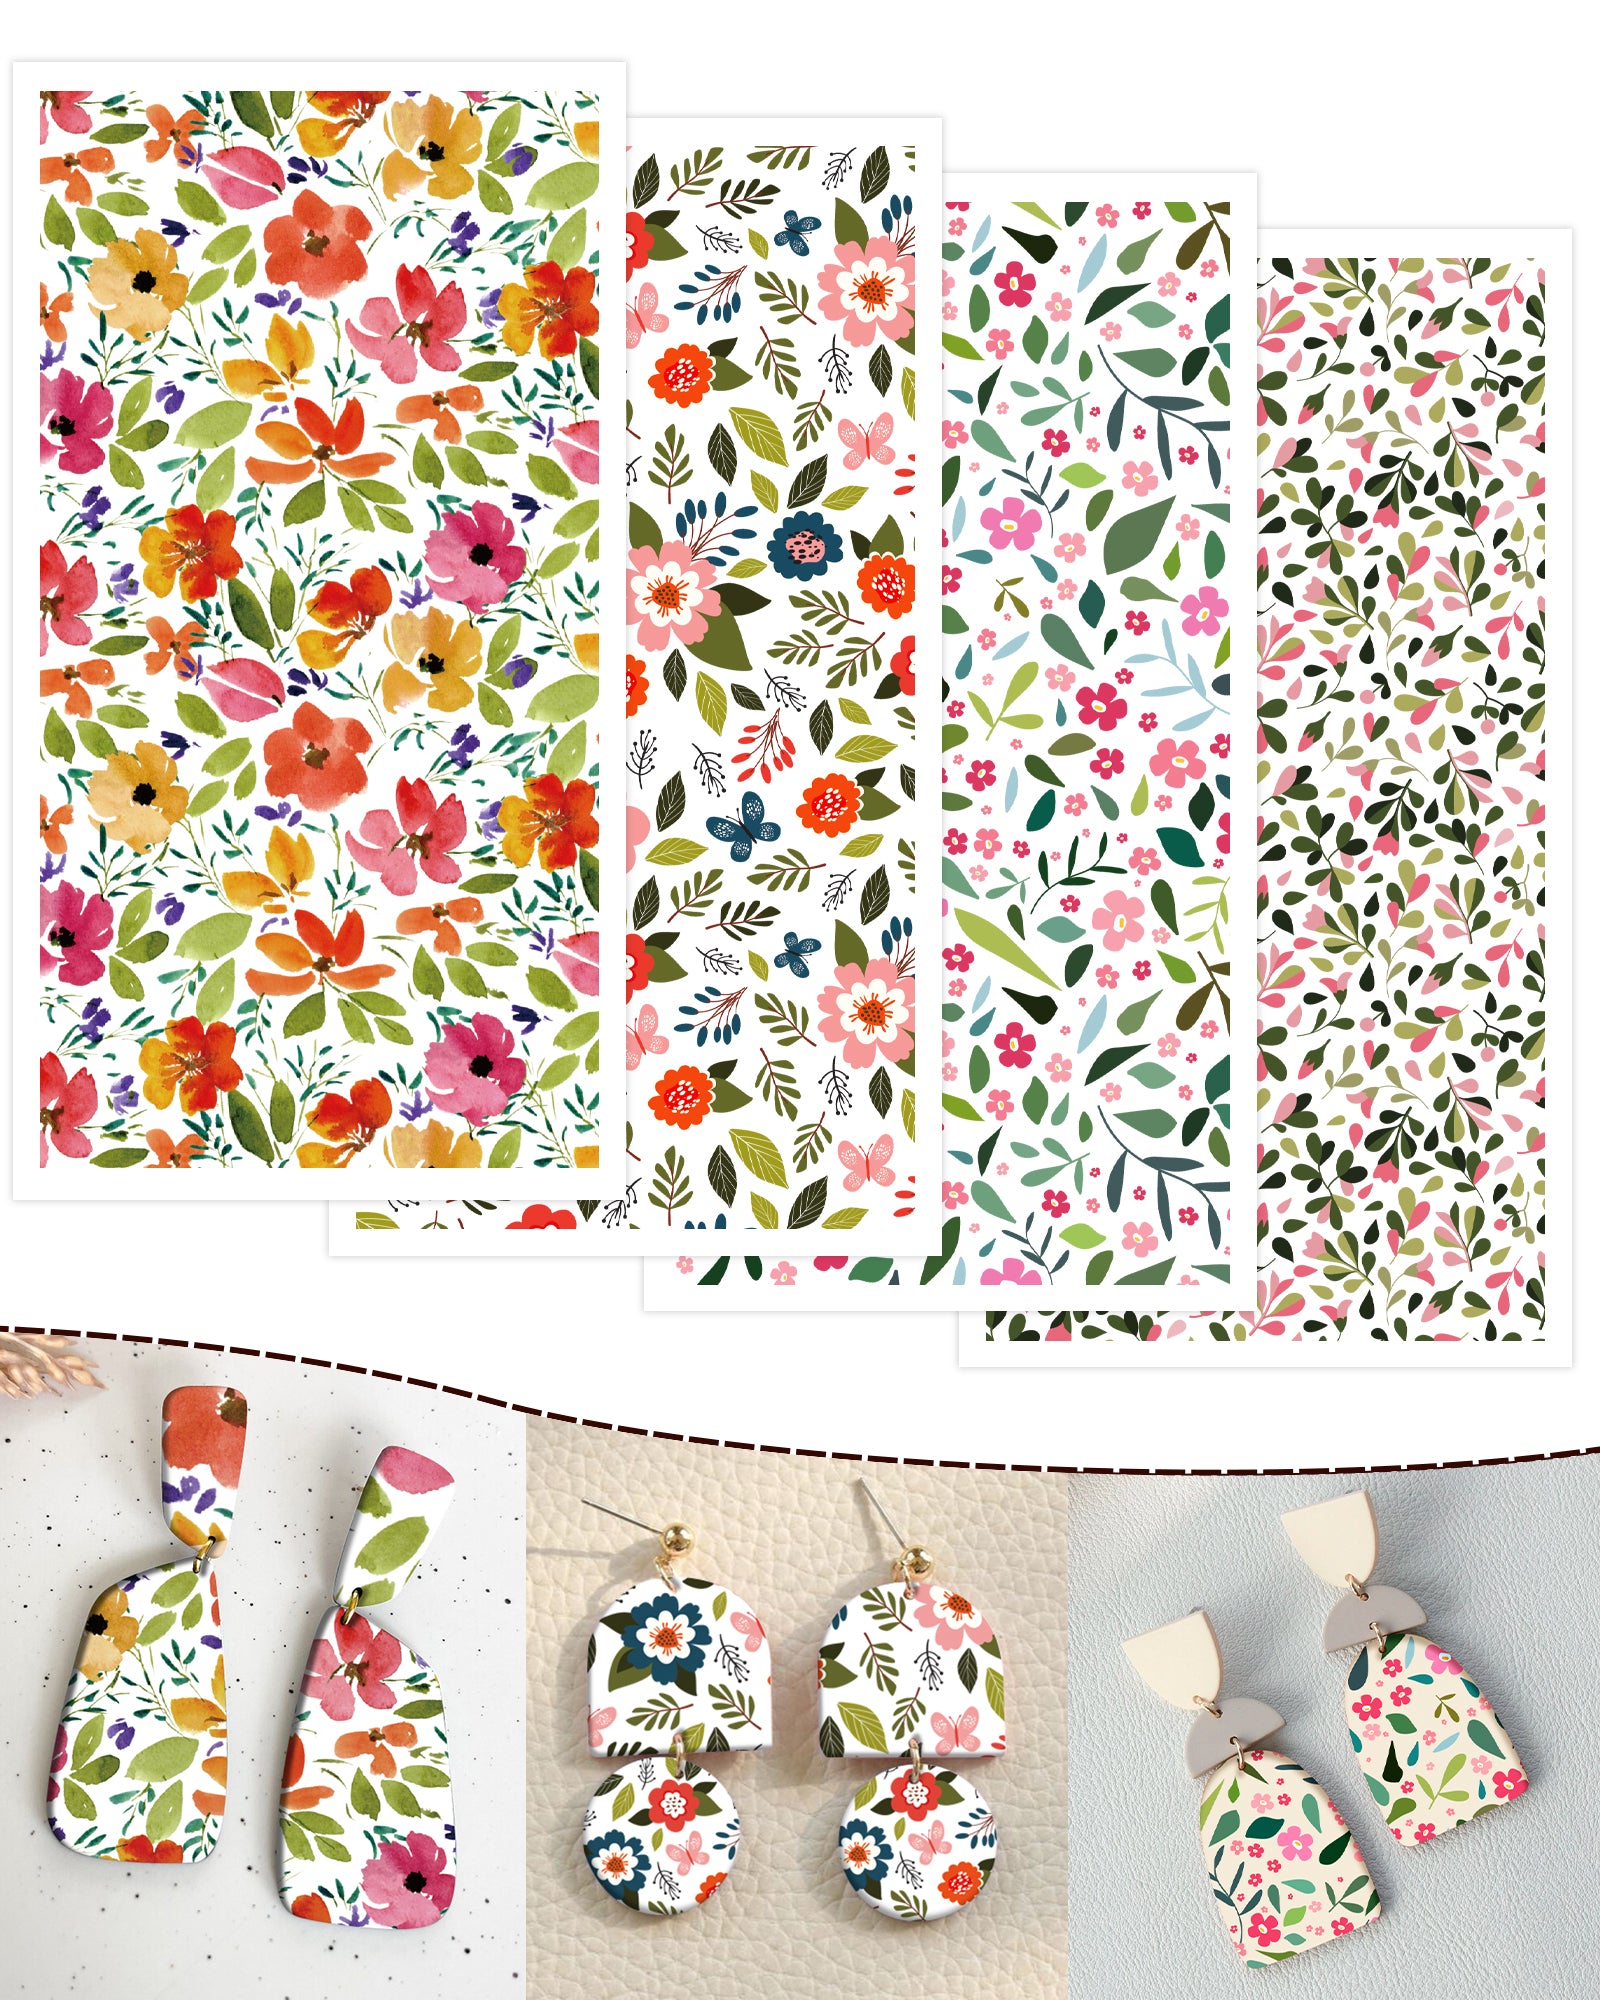 Puocaon Cosmos Flower Polymer Clay Transfer Paper 20 Pcs